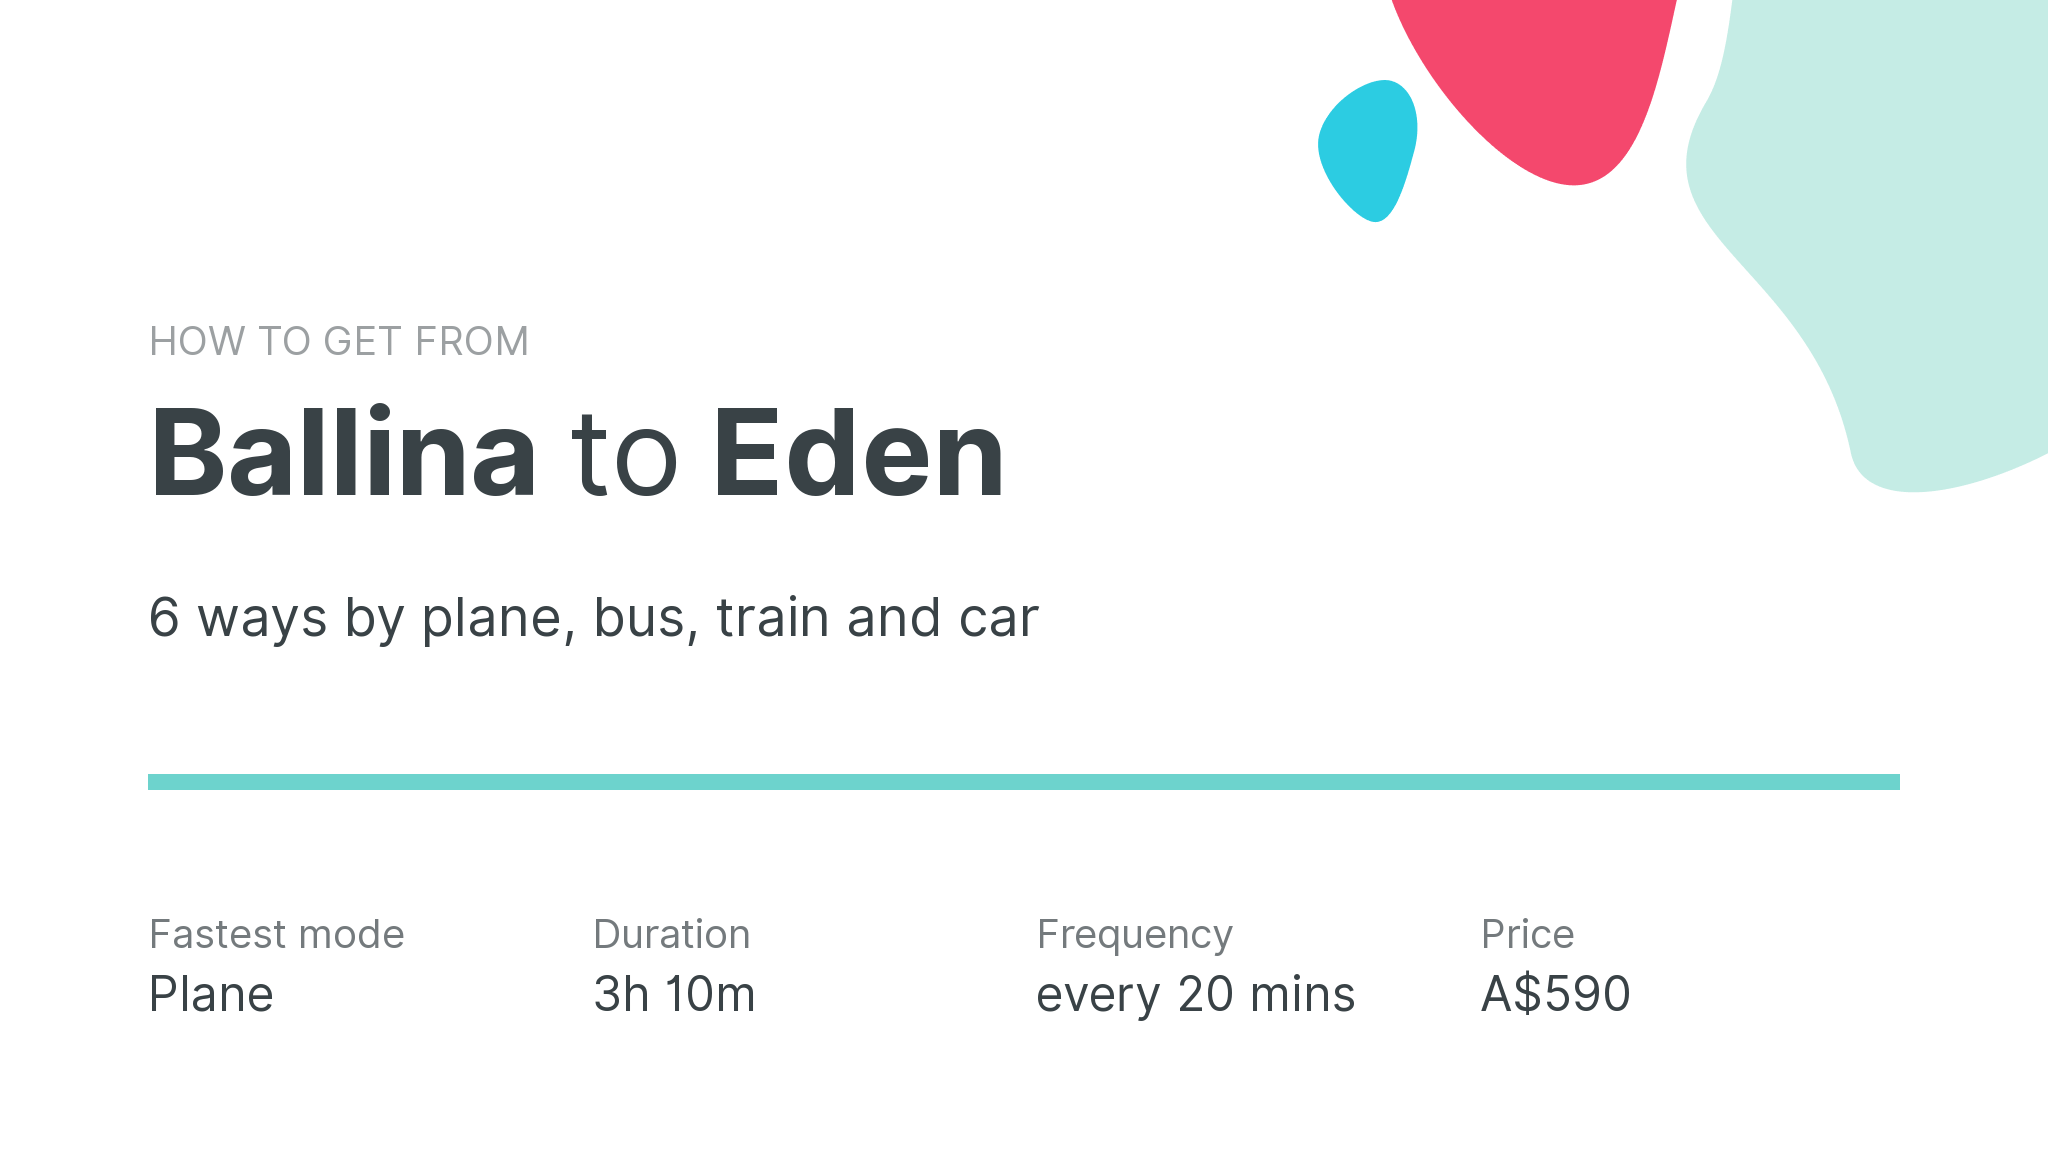 How do I get from Ballina to Eden